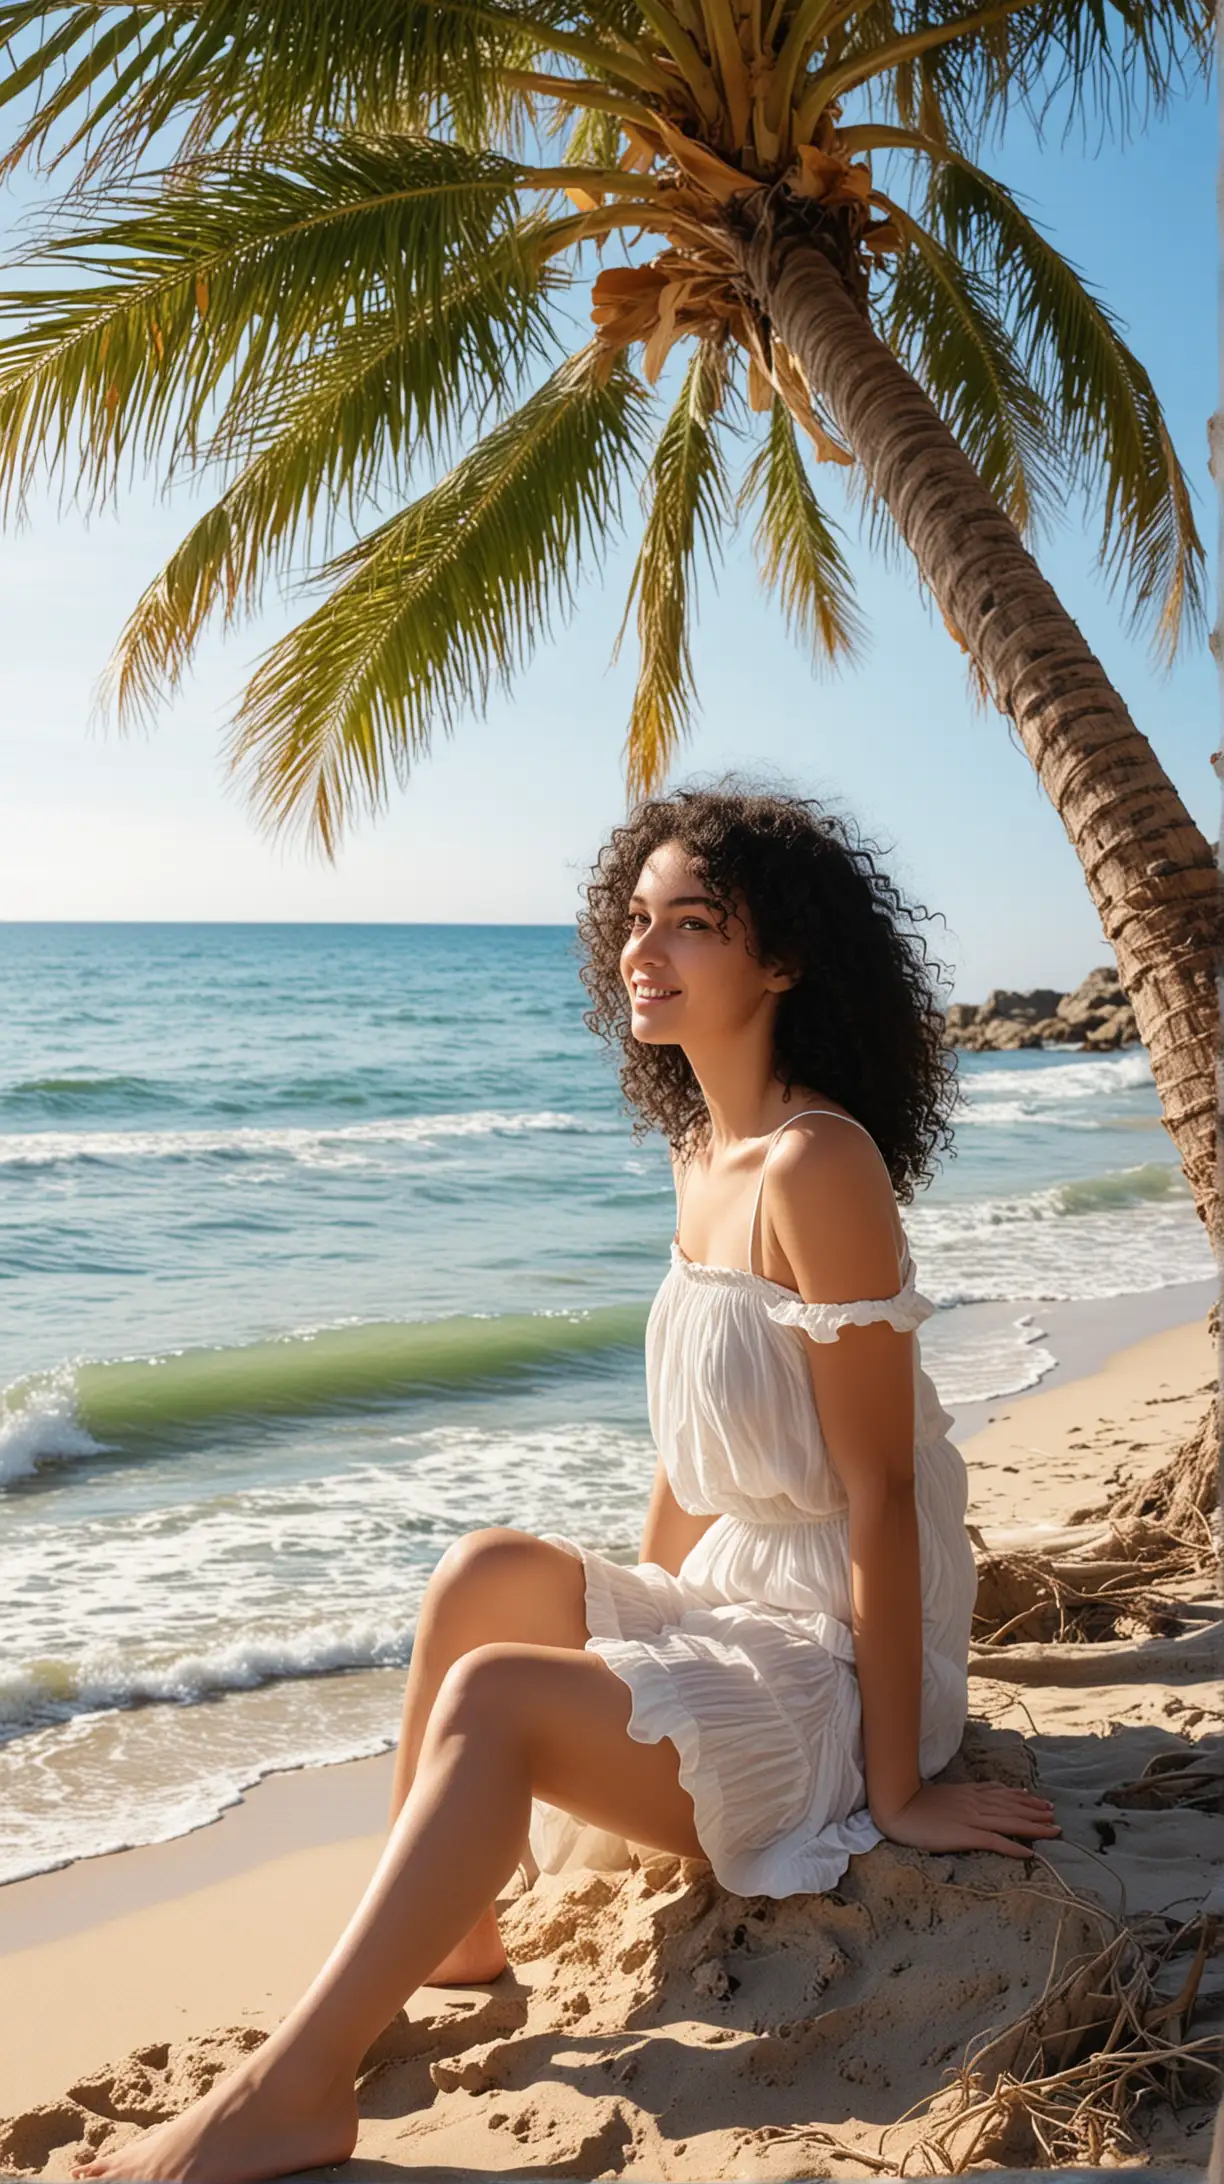 Girl with Black Curly Hair Sitting by Palm Tree on Beach with Blue Sea and Sun